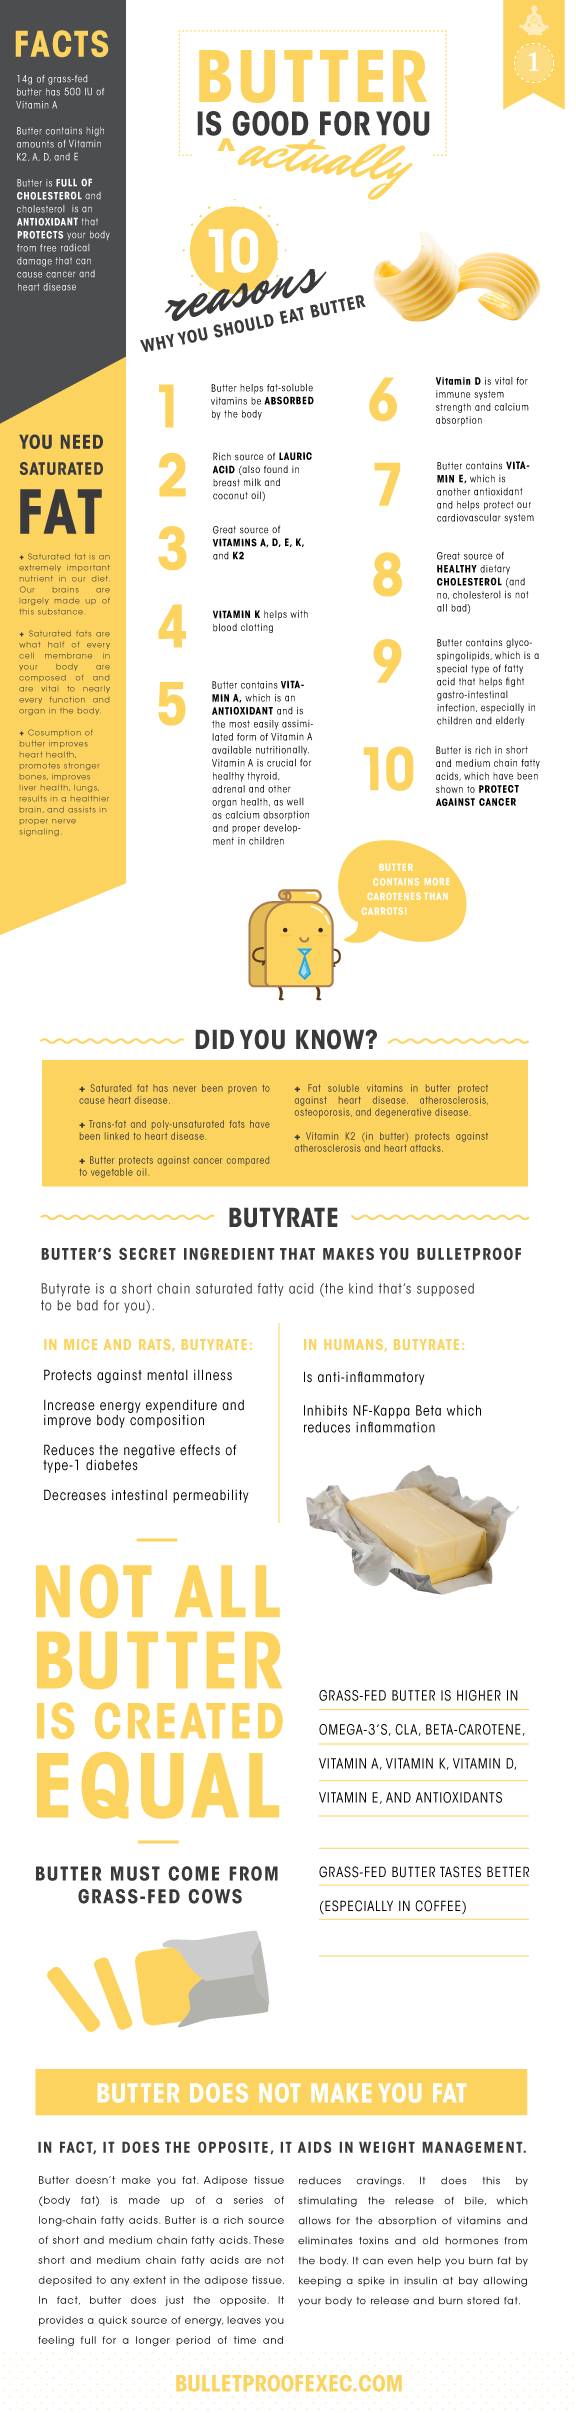 Here’s Why Butter is Actually Good For You [INFOGRAPHIC]